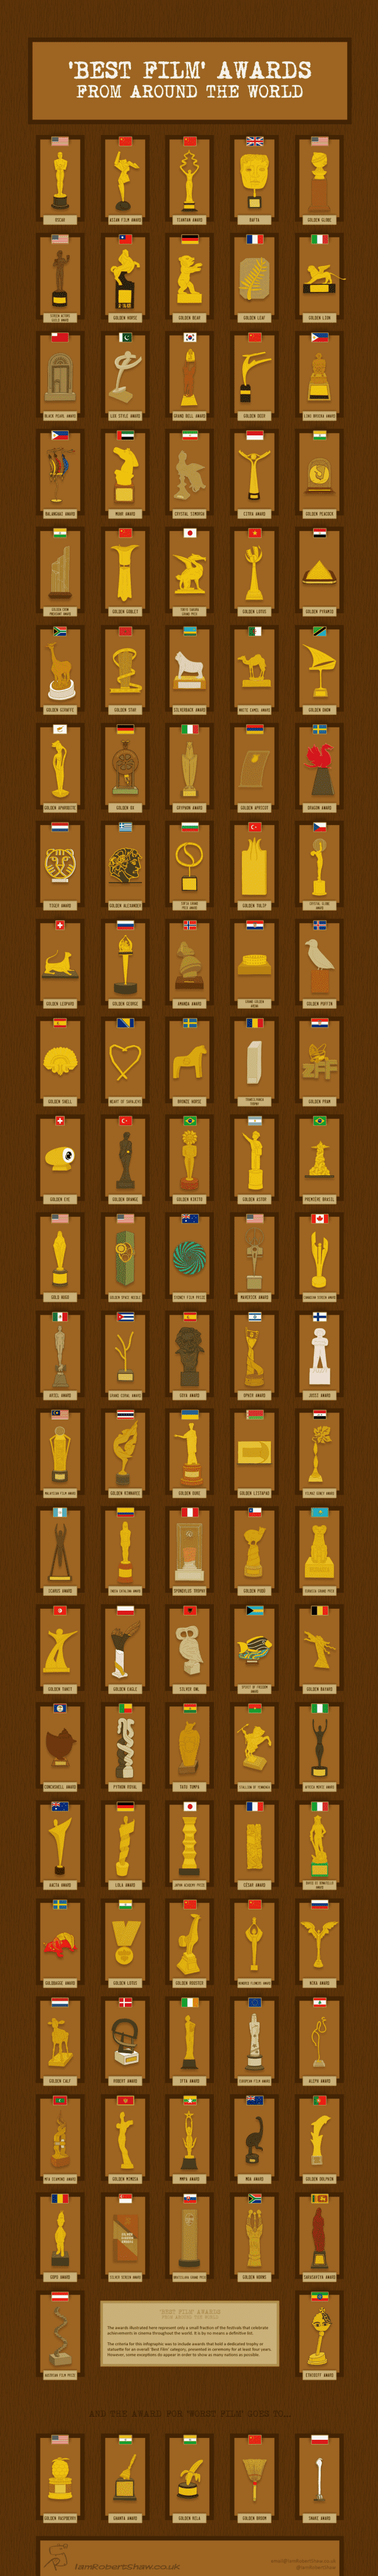 Excellent infographic from Robert Shaw showing all the film awards from around the world